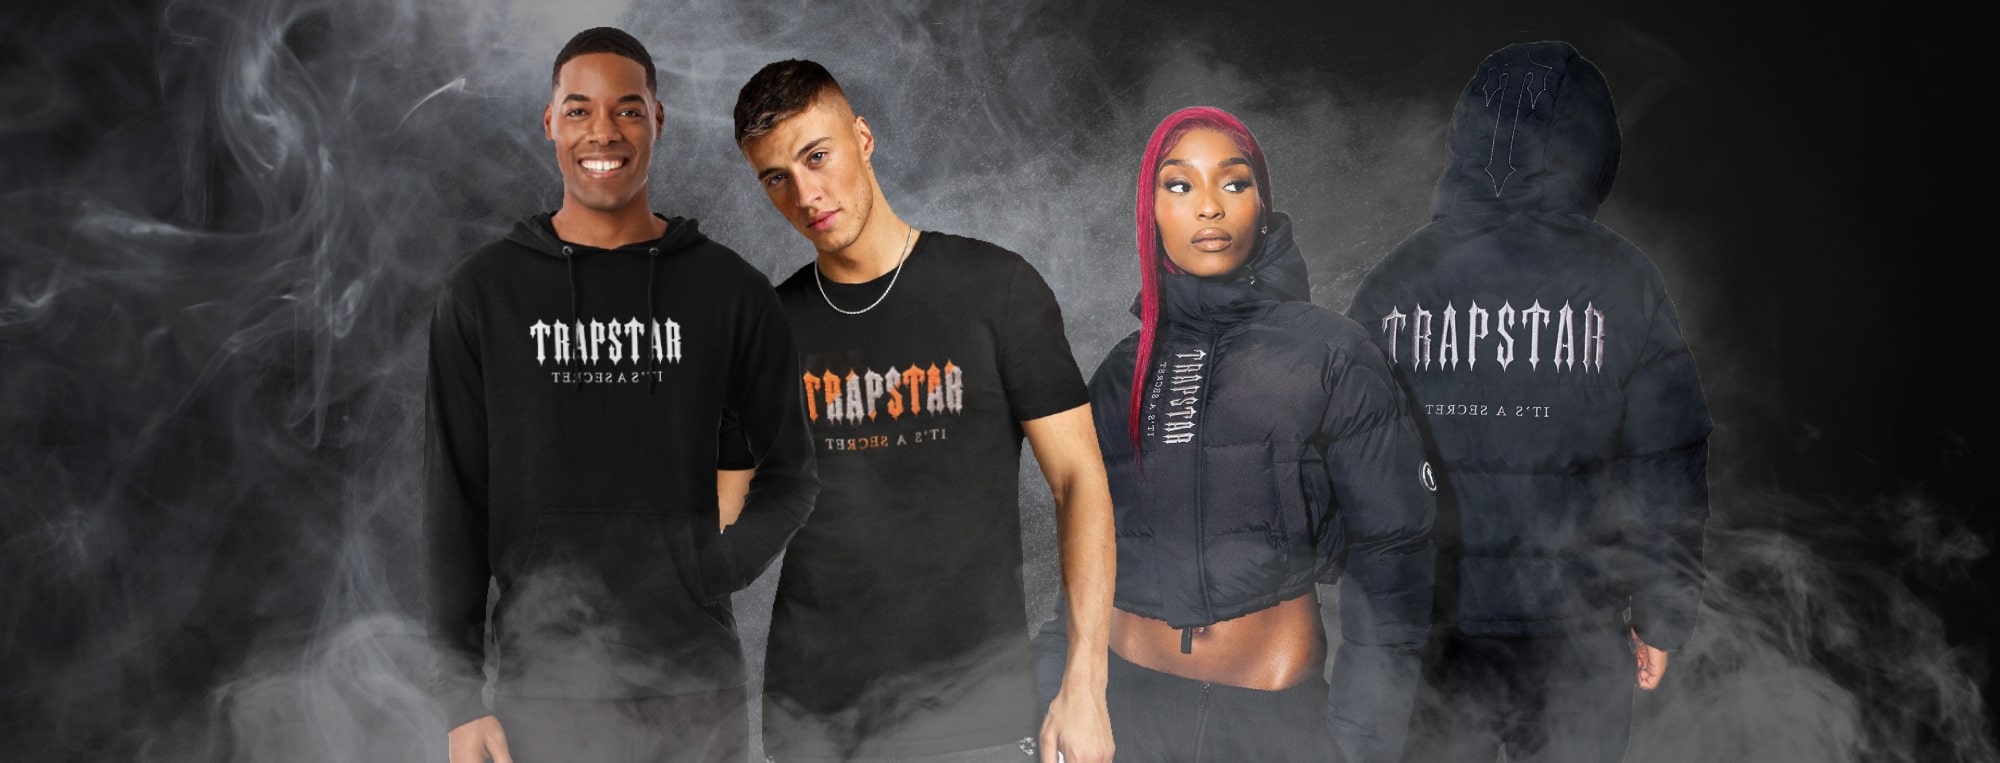 trapstar official banner